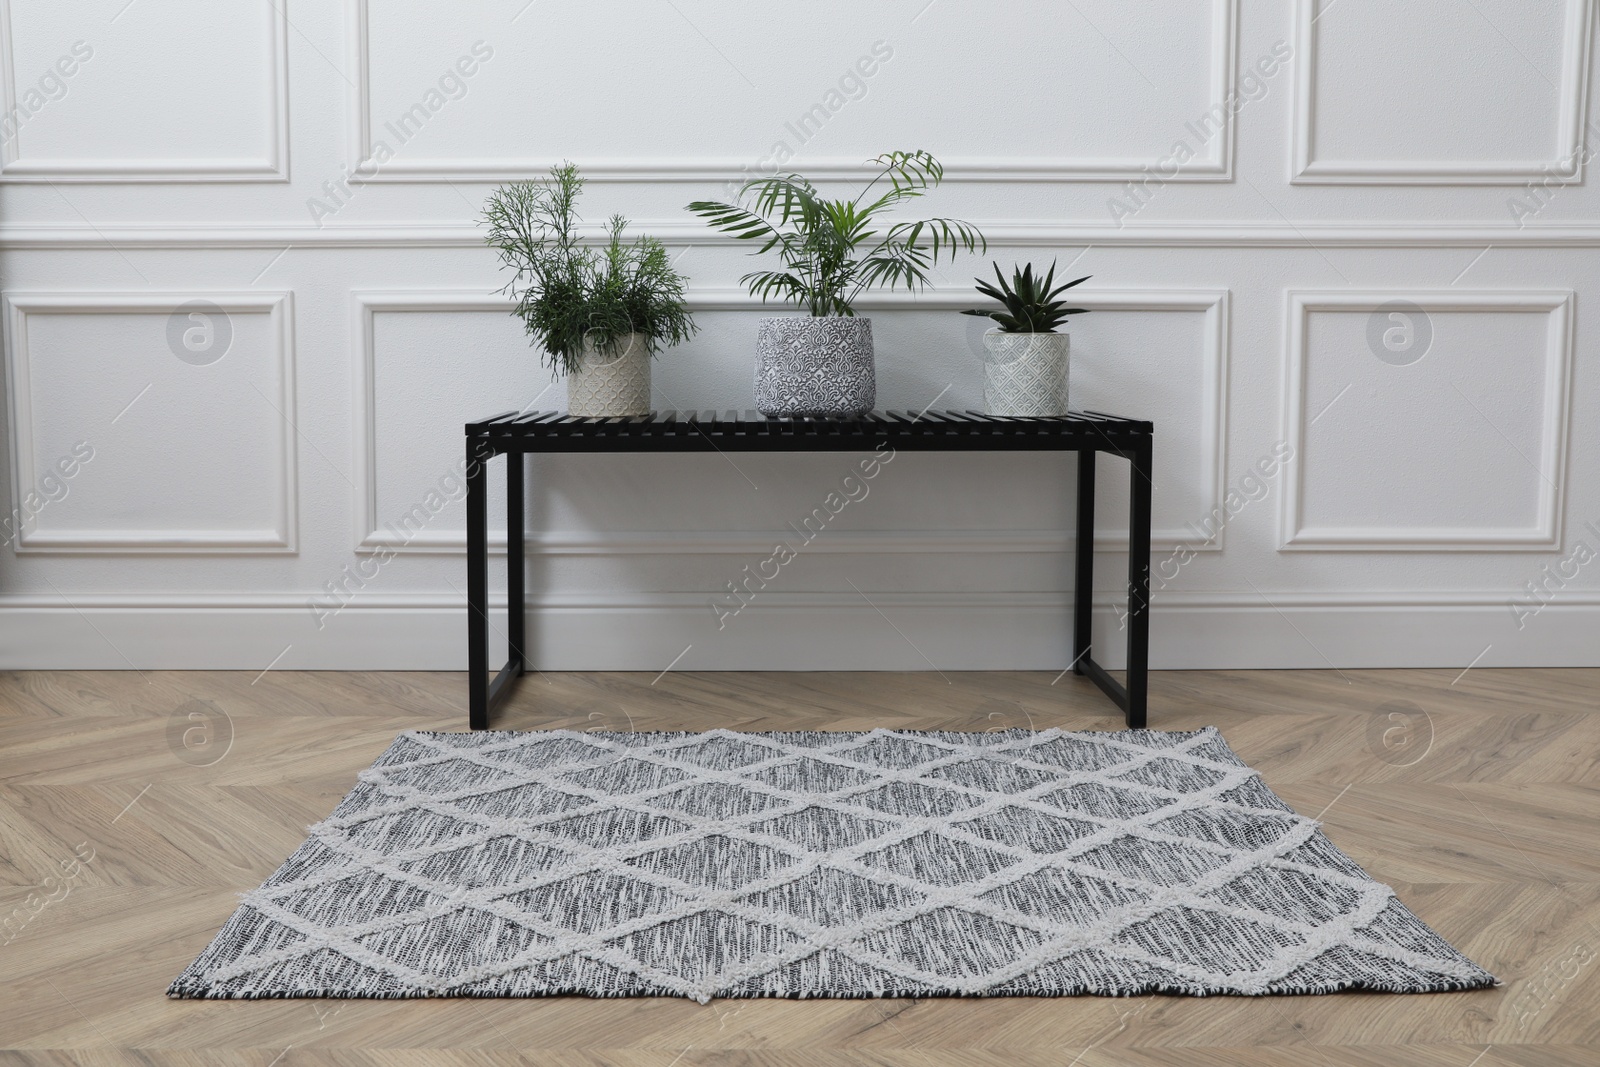 Photo of Bench with houseplants and rug on room. Interior accessory